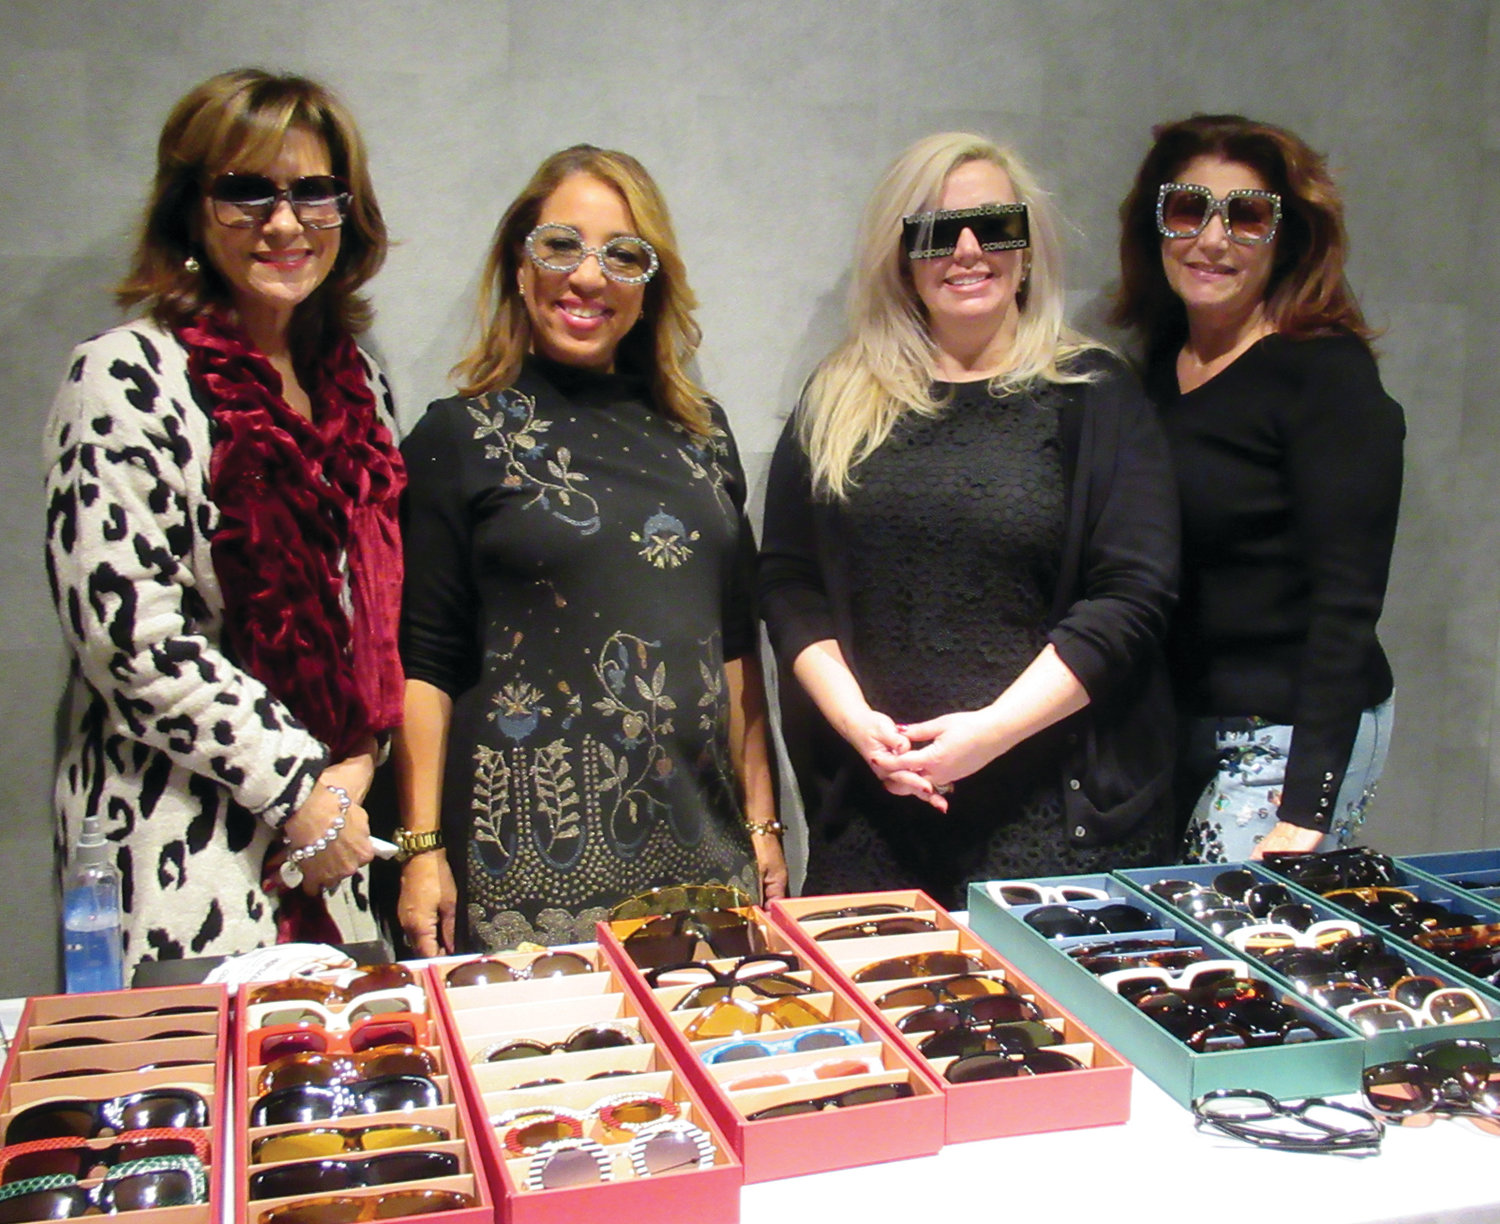 GUCCI GIRLS: Gucci representative Suzette (second left) and ladies like Cynthia Parker, Lynne Diamante and Deb Crossley model the latest look in eye fashion during the recent “Shop for a Cause” in Johnston that was the first event of its kind in New England.